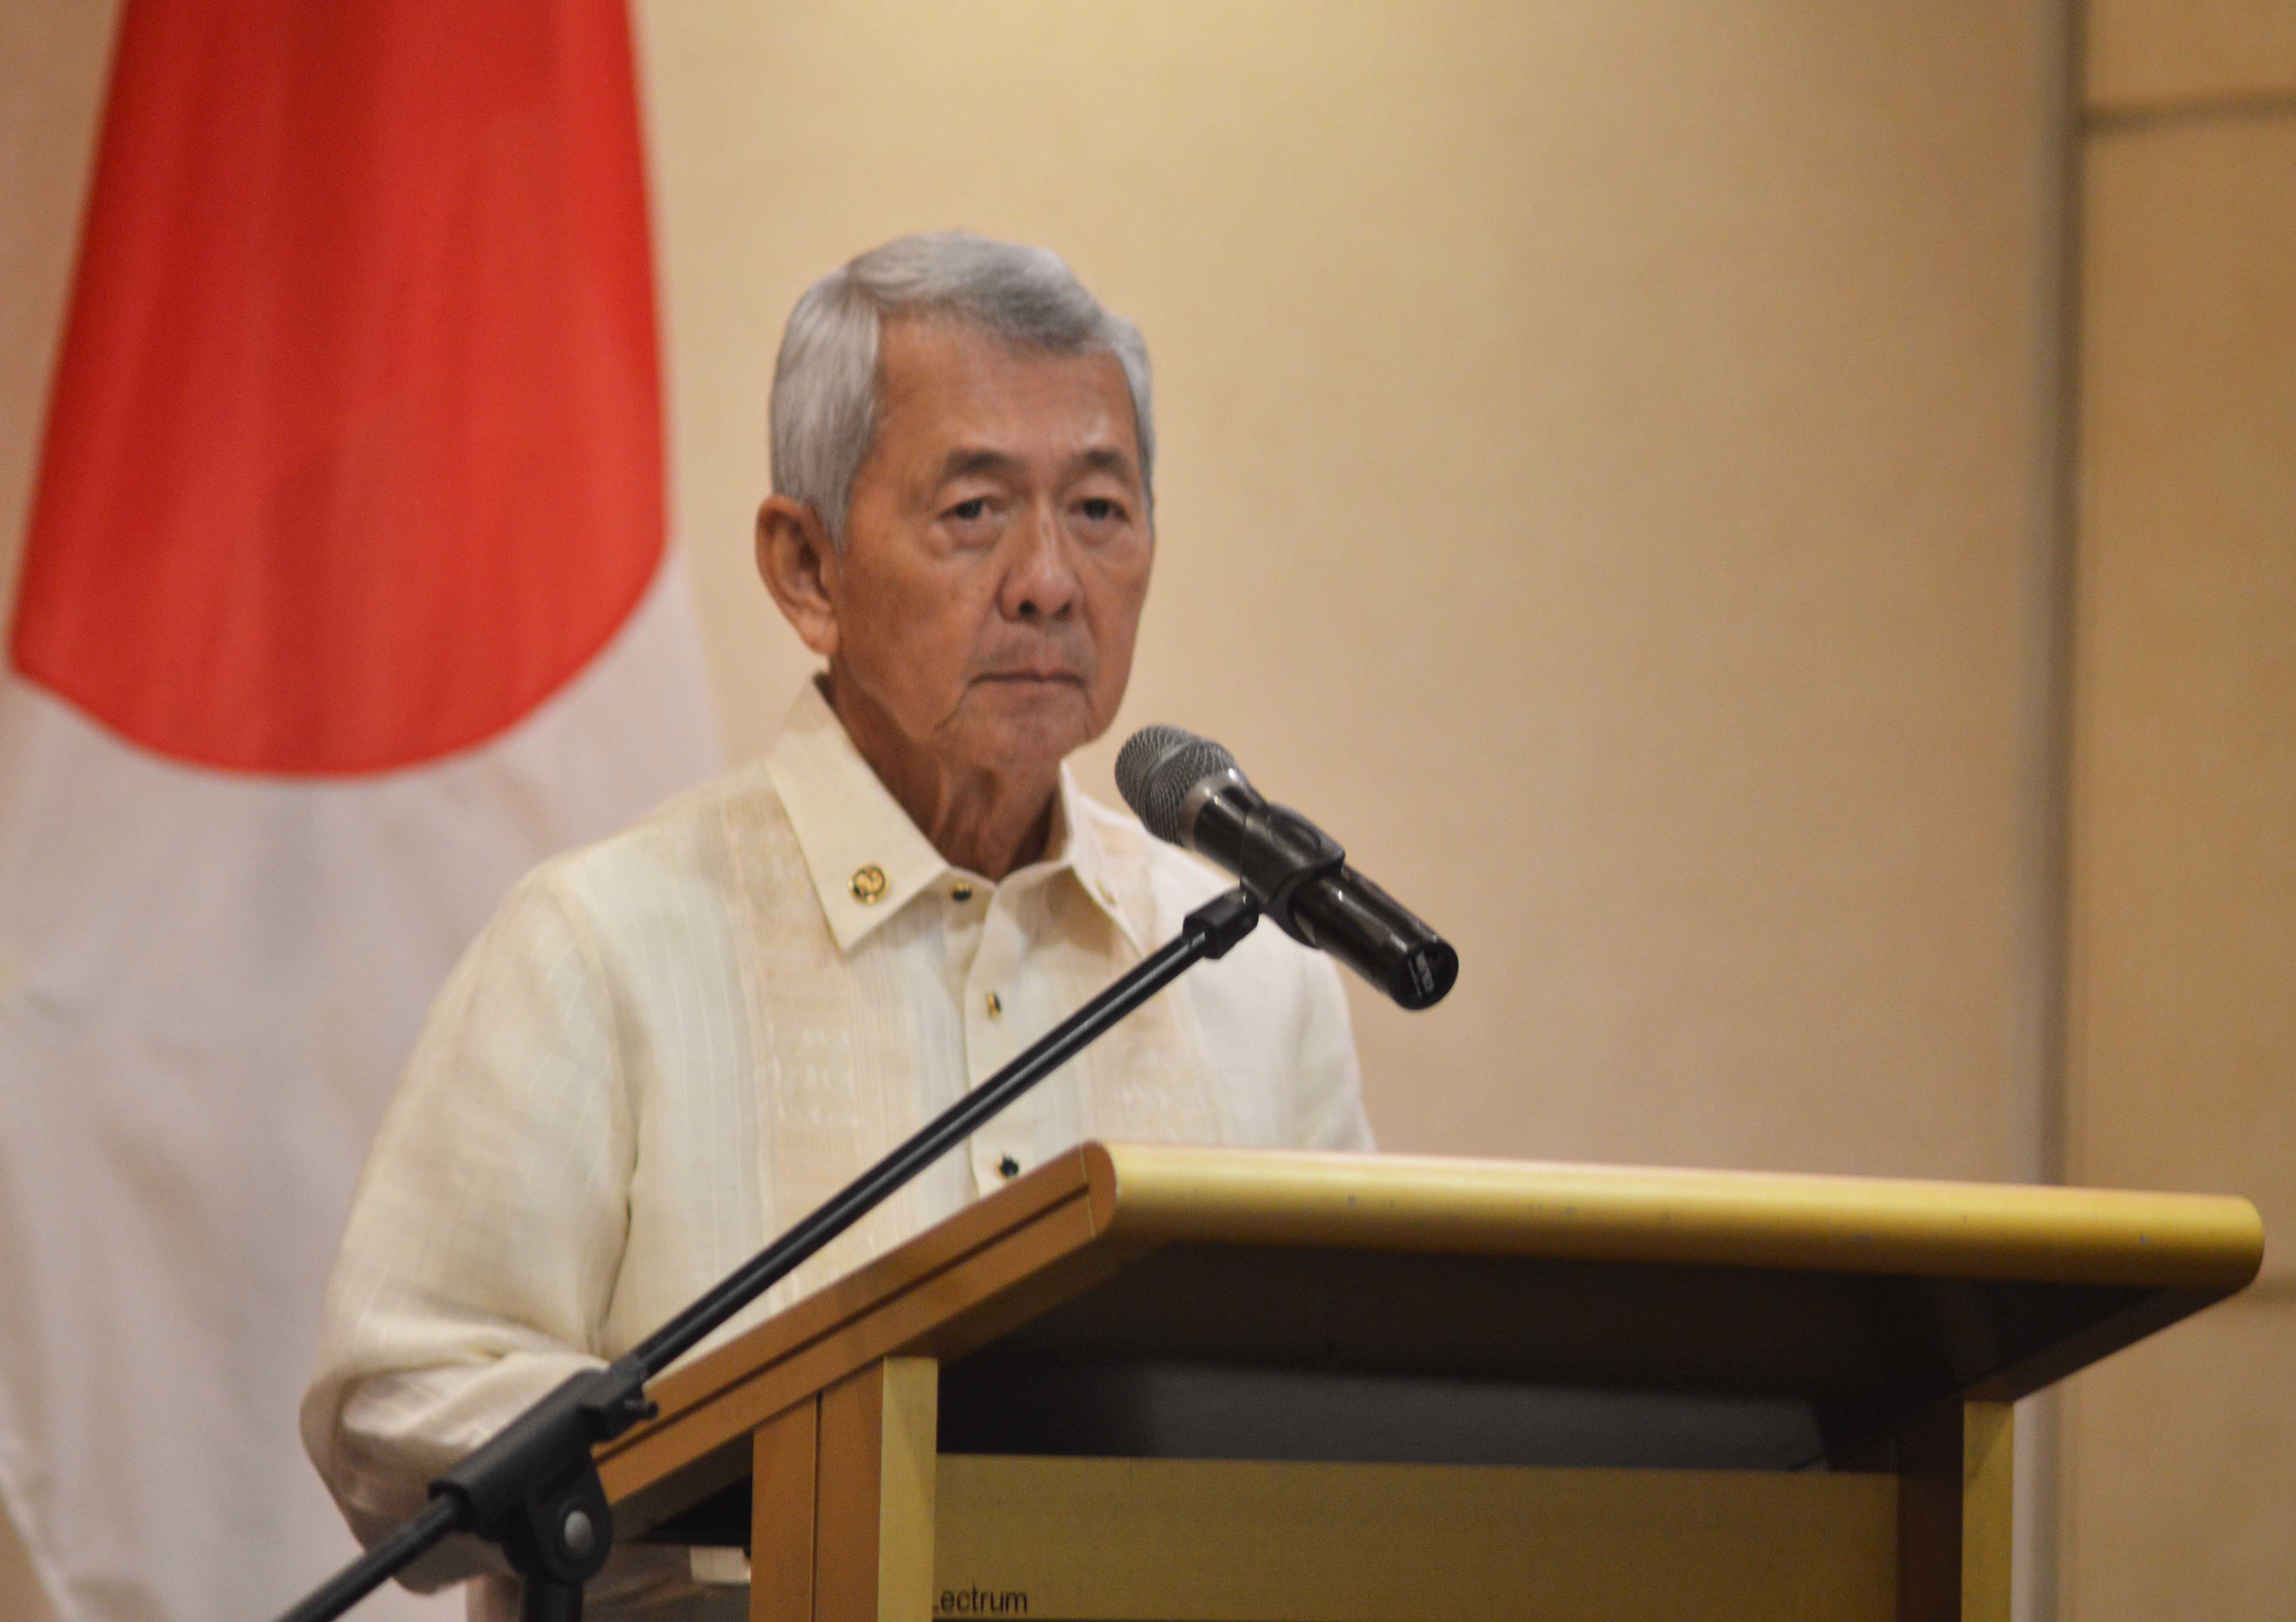 Foreign Affairs Secretary Perfecto Yasay says that Japan provides the largest official development assistance to the Philippines at 35 percent. After a meeting with Yasay, Japanese Foreign Minister Fumio Kishida had a courtesy call with President Rodrigo Duterte at the Presidential Guest House in Panacan, Davao City on Thursday, August 11, 2016. (Medel V. Hernani/davaotoday.com)